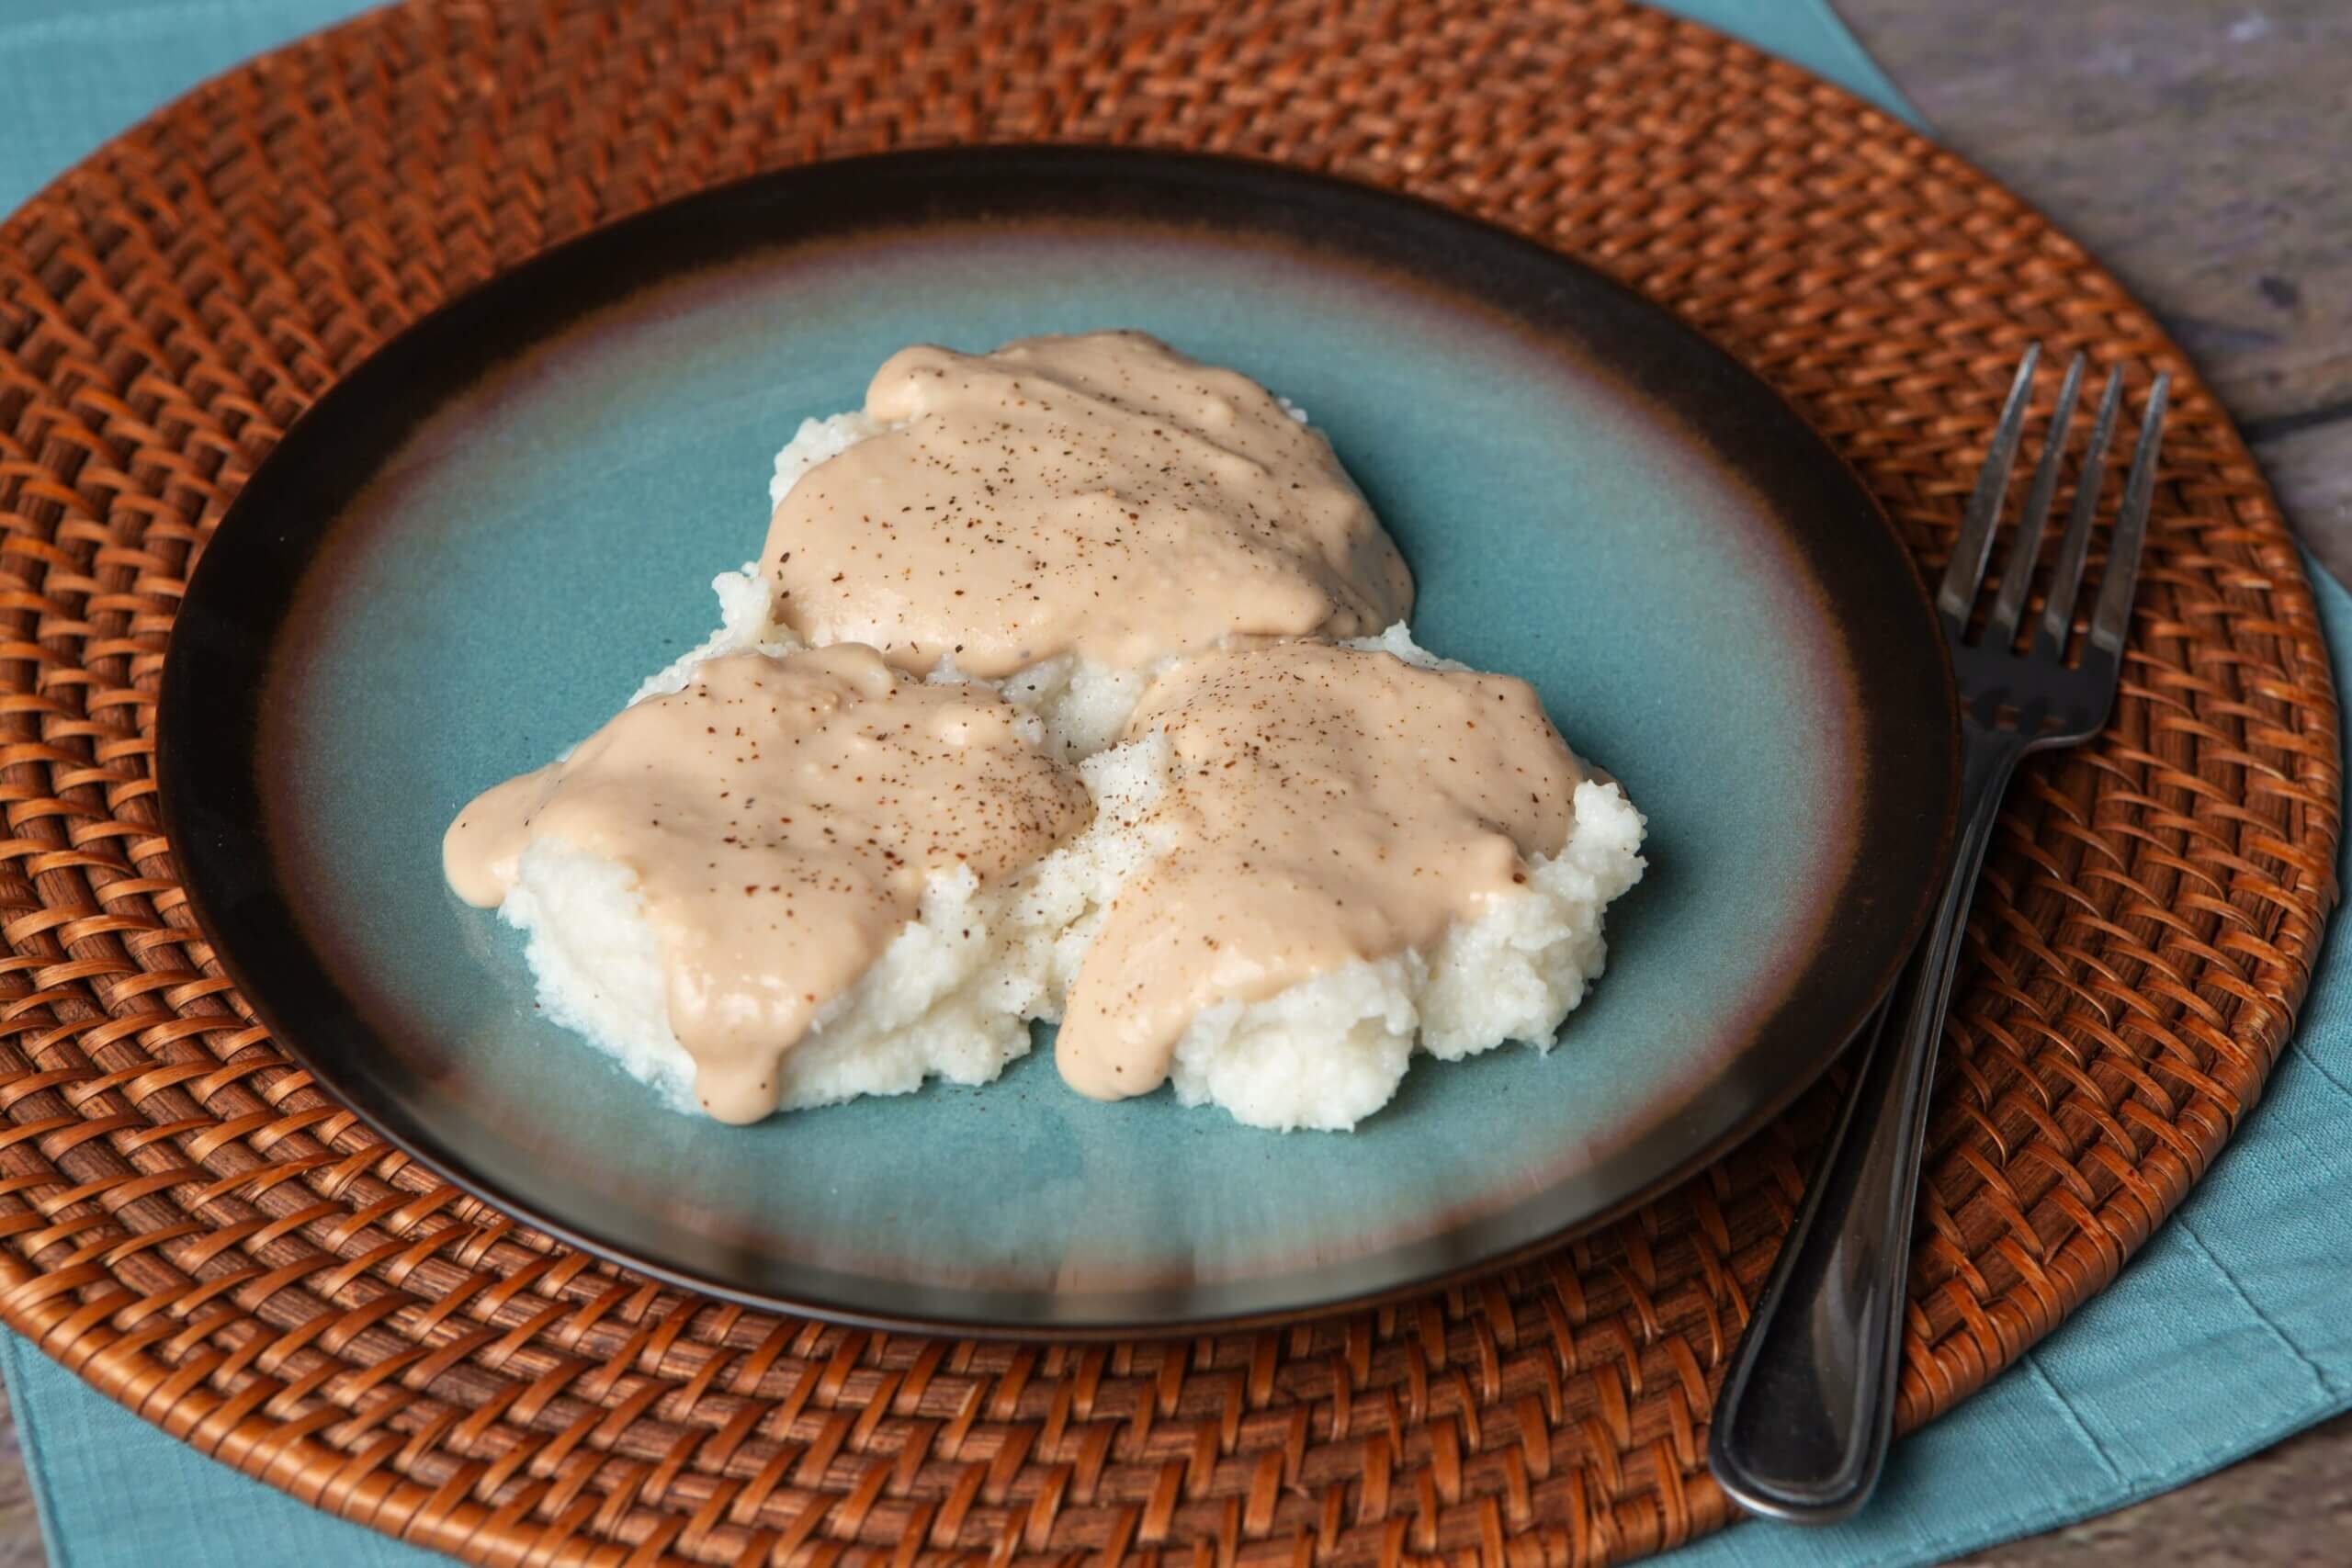 Dysphagia-friendly biscuits and gravy